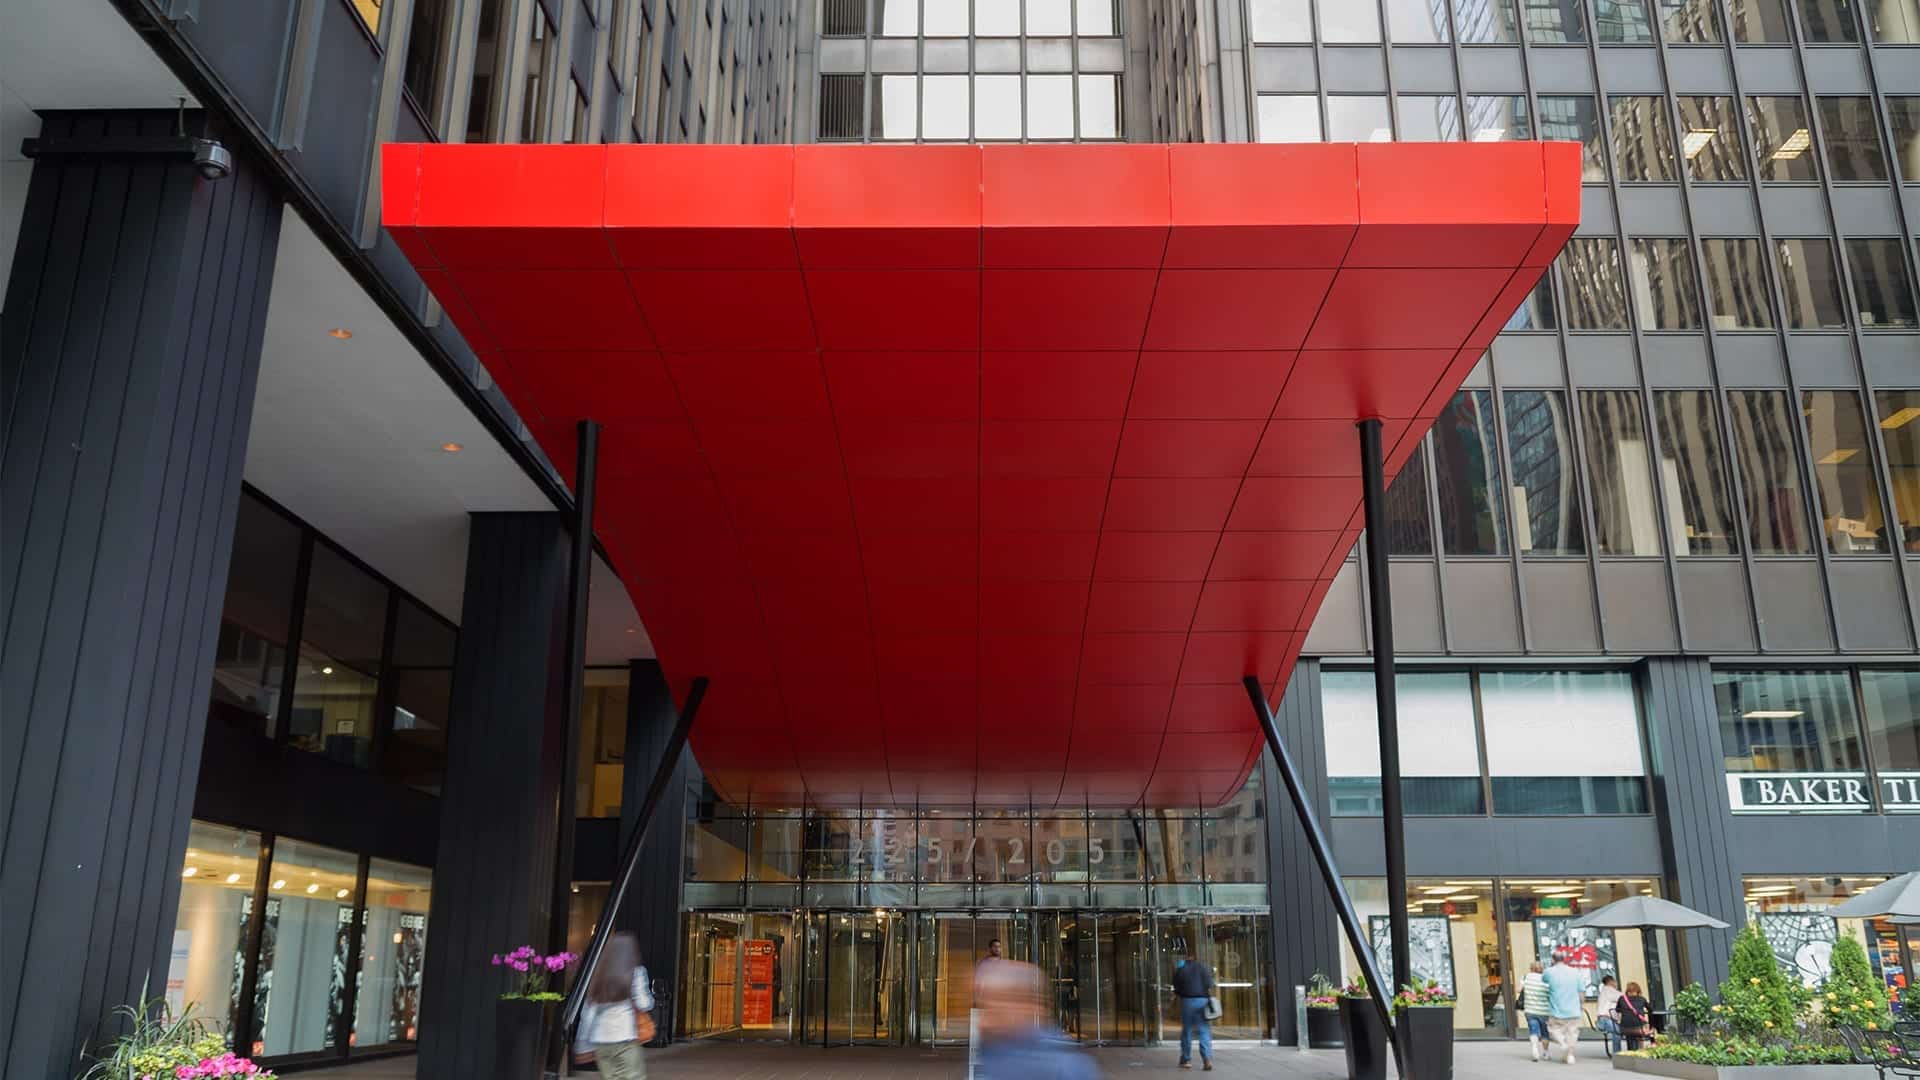 View of the red painted aluminum canopy from Michigan Avenue in Chicago.